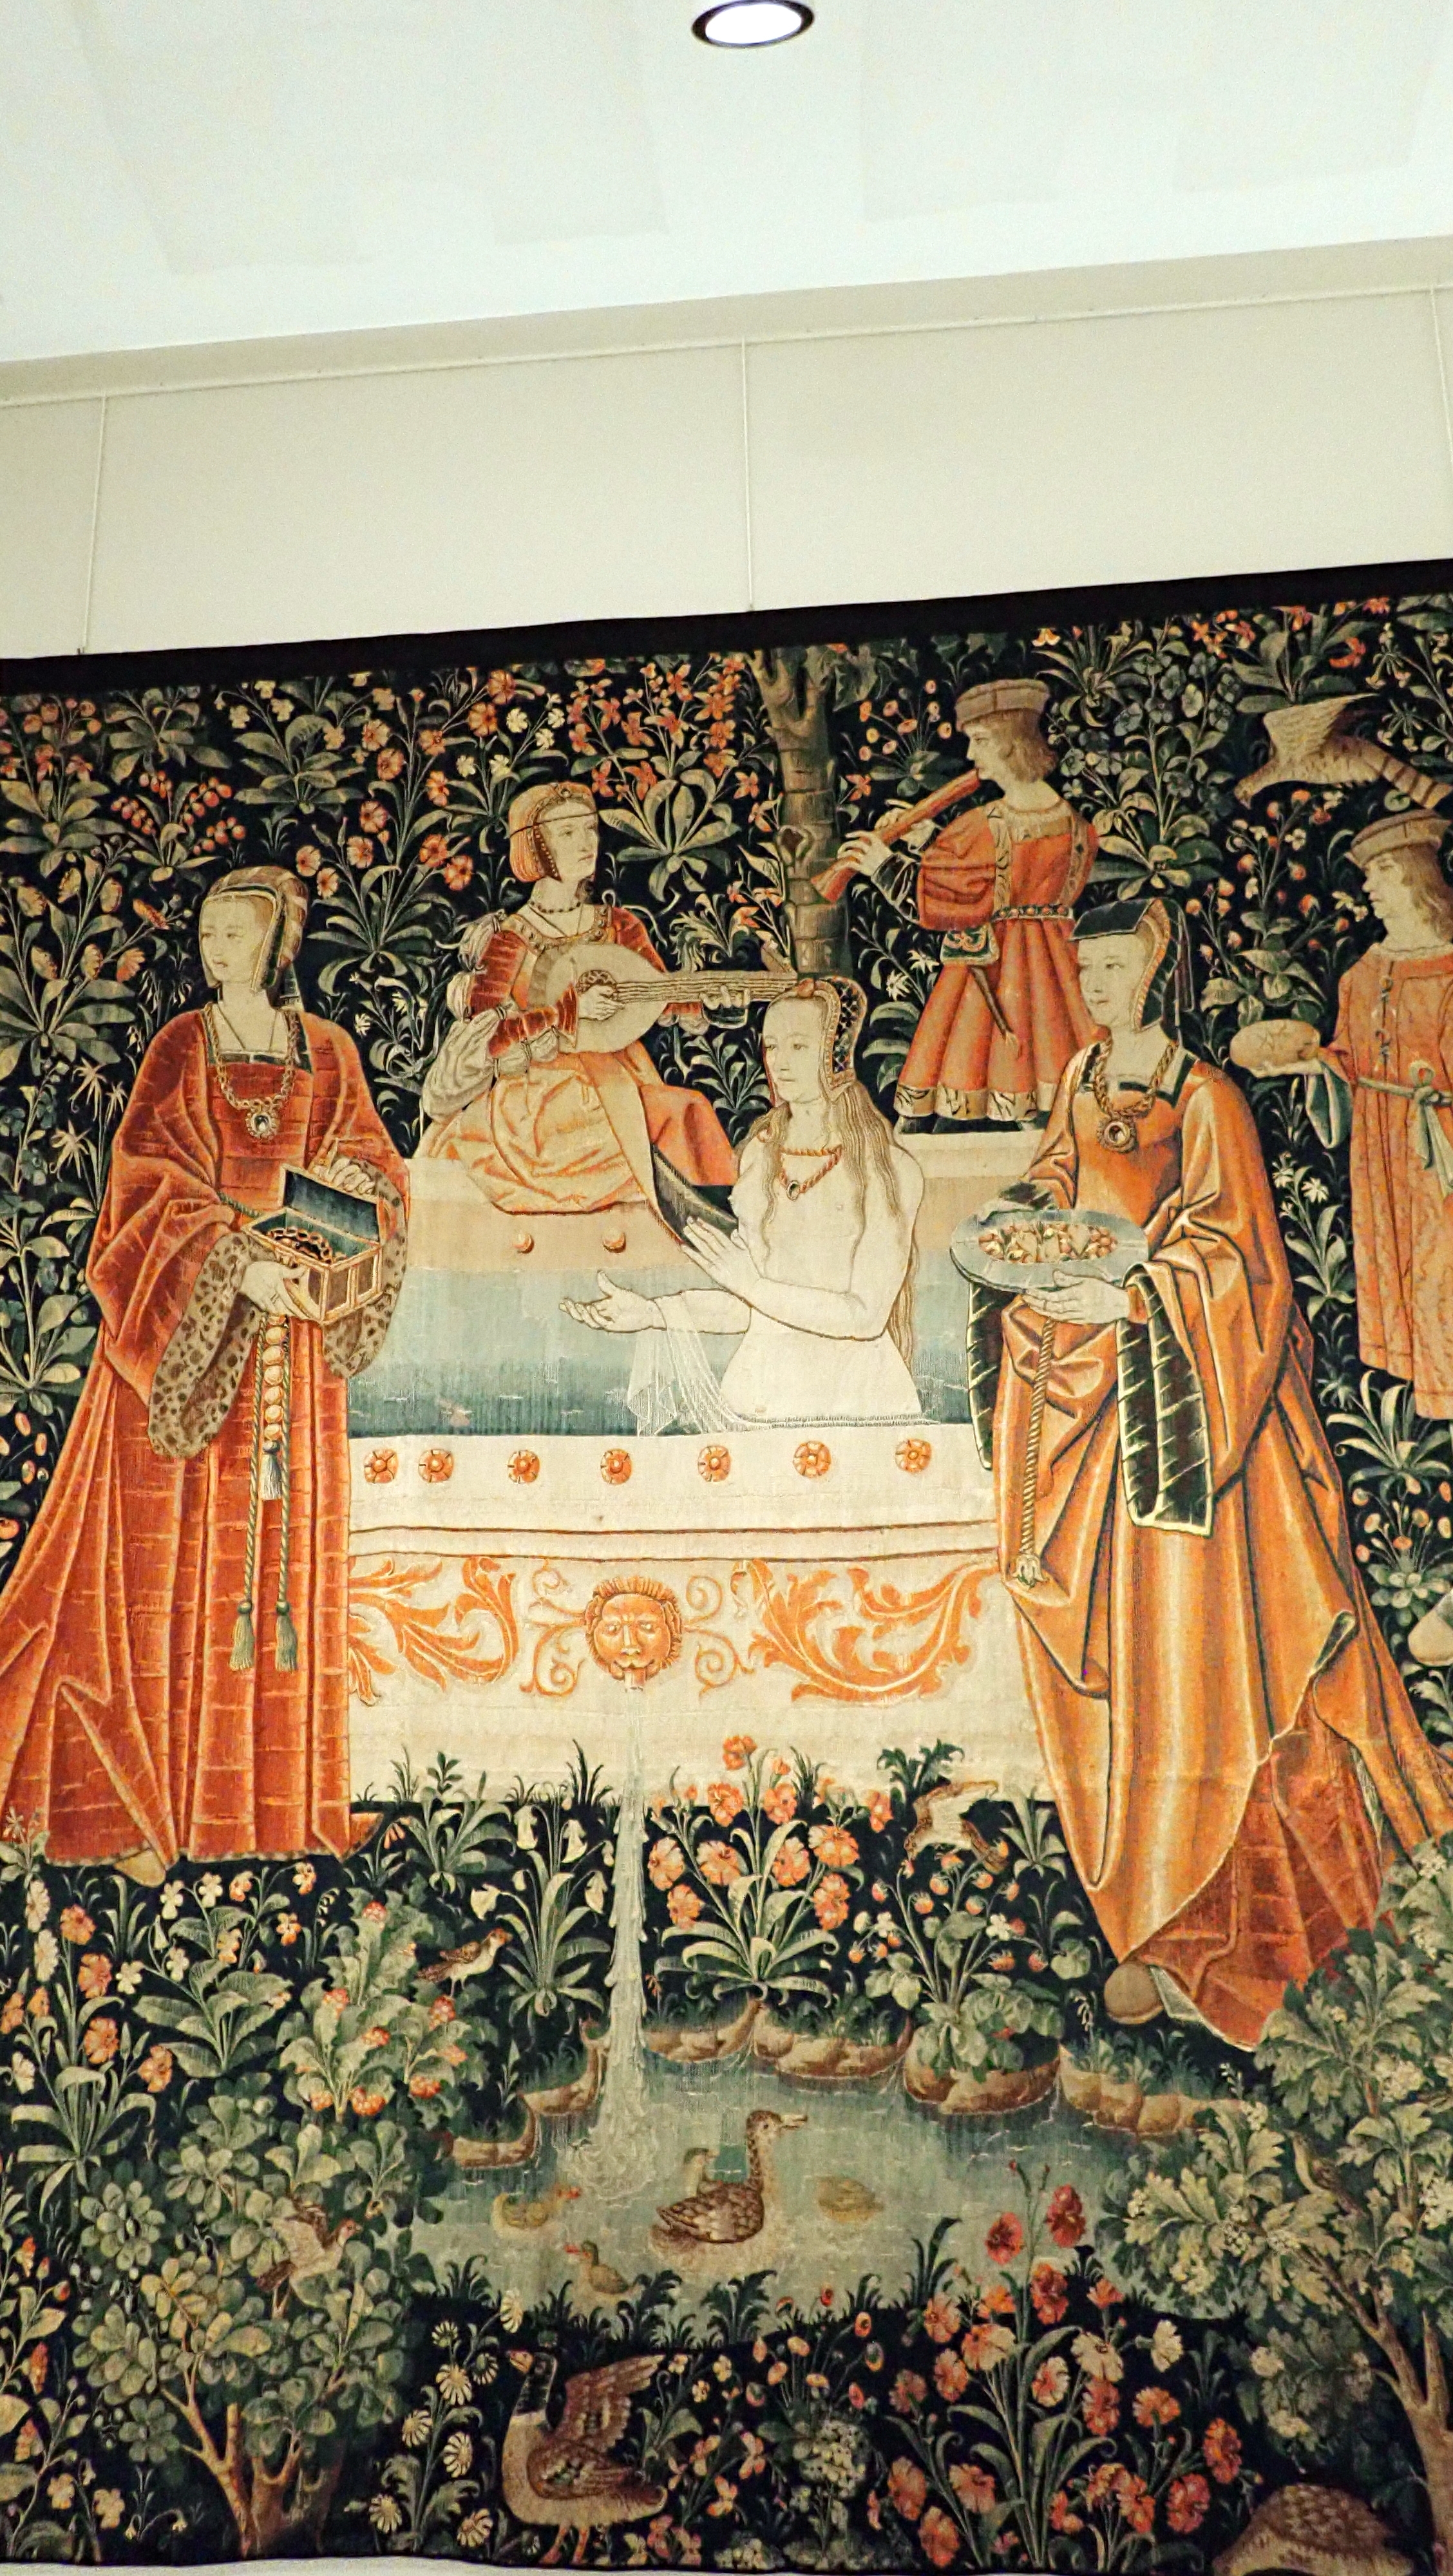 1500 (approx) - Cluny museum - Tapestry from the Seigneurial life series - The Bath